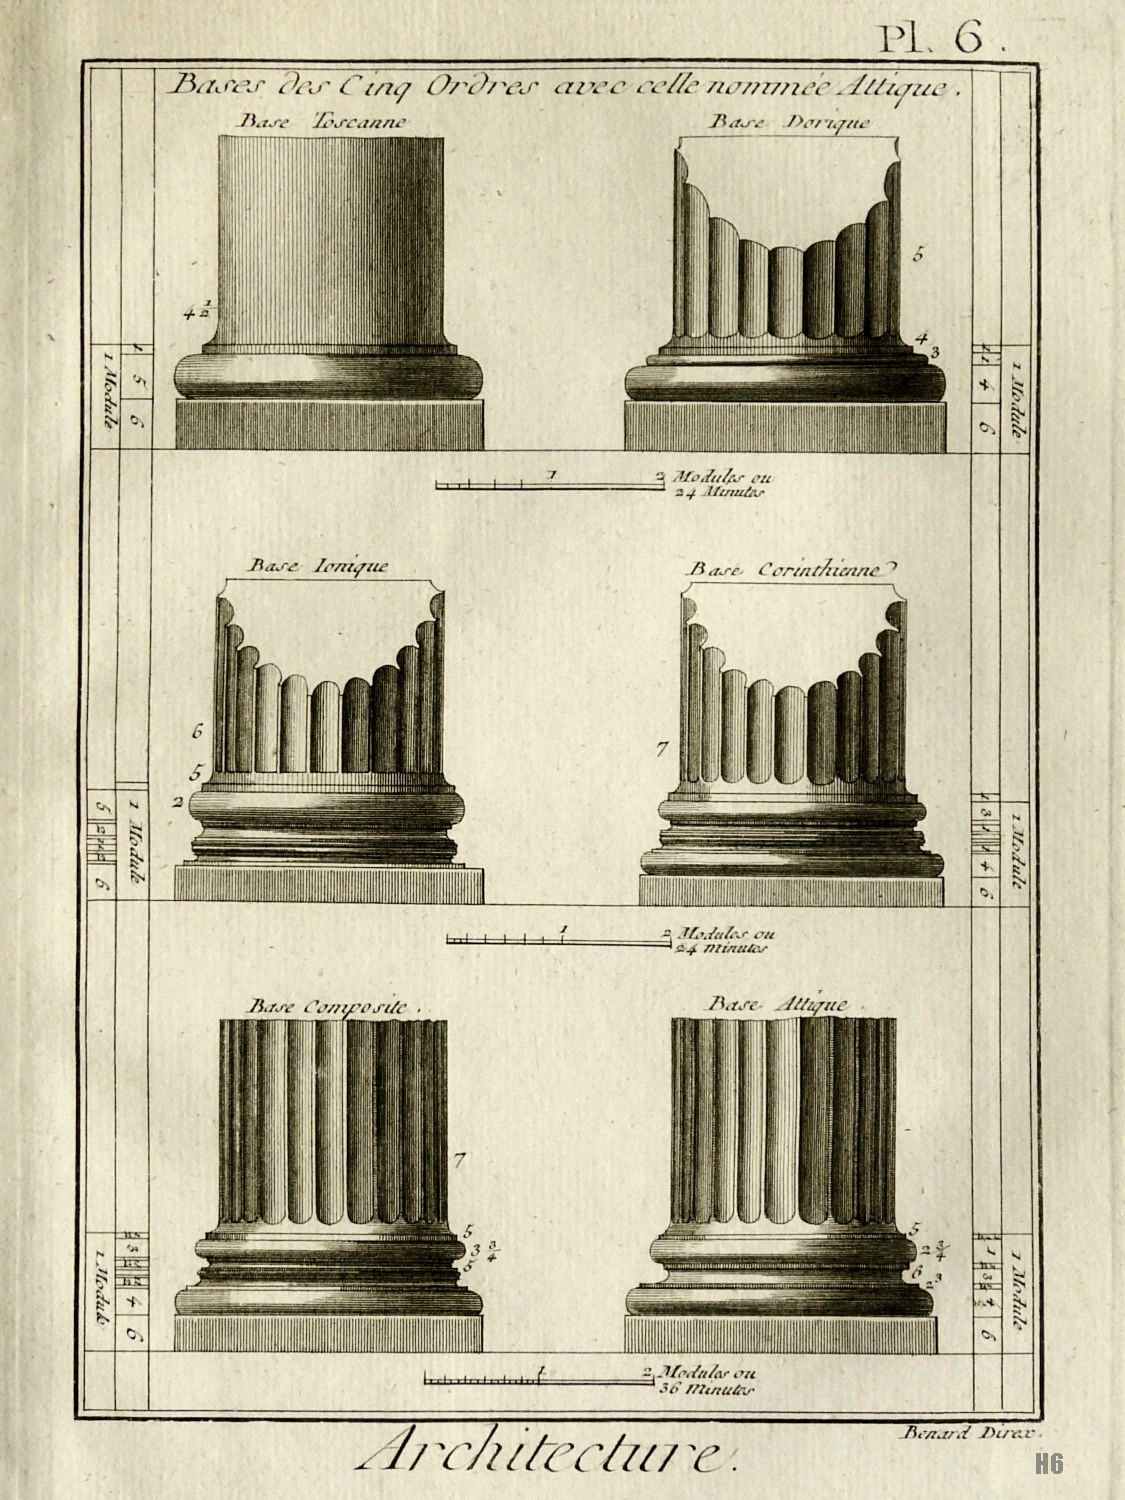 Architecture - Classic Order of Column Bases. 1779.   copper engraving on laid paper.
http://hadrian6.tumblr.com